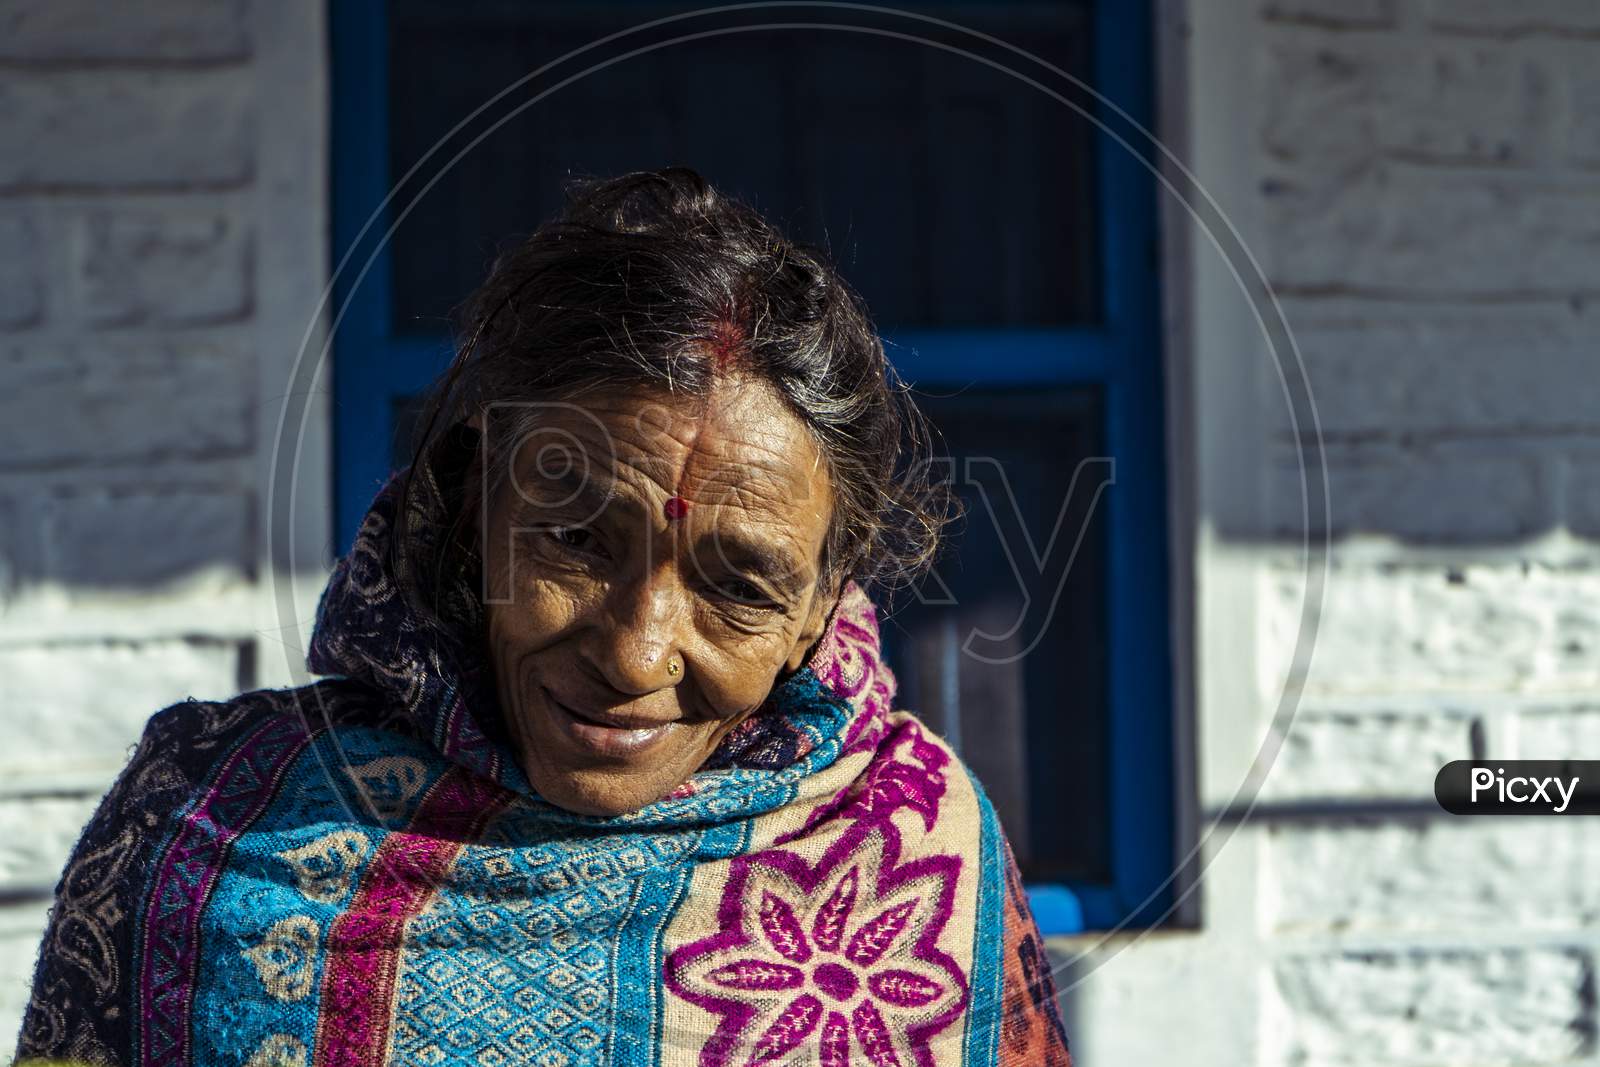 Almora, Uttarakhand - Jaunary 2 2022- Portrait Of An India Old Aged Woman From The Villages Of Uttarakhand.